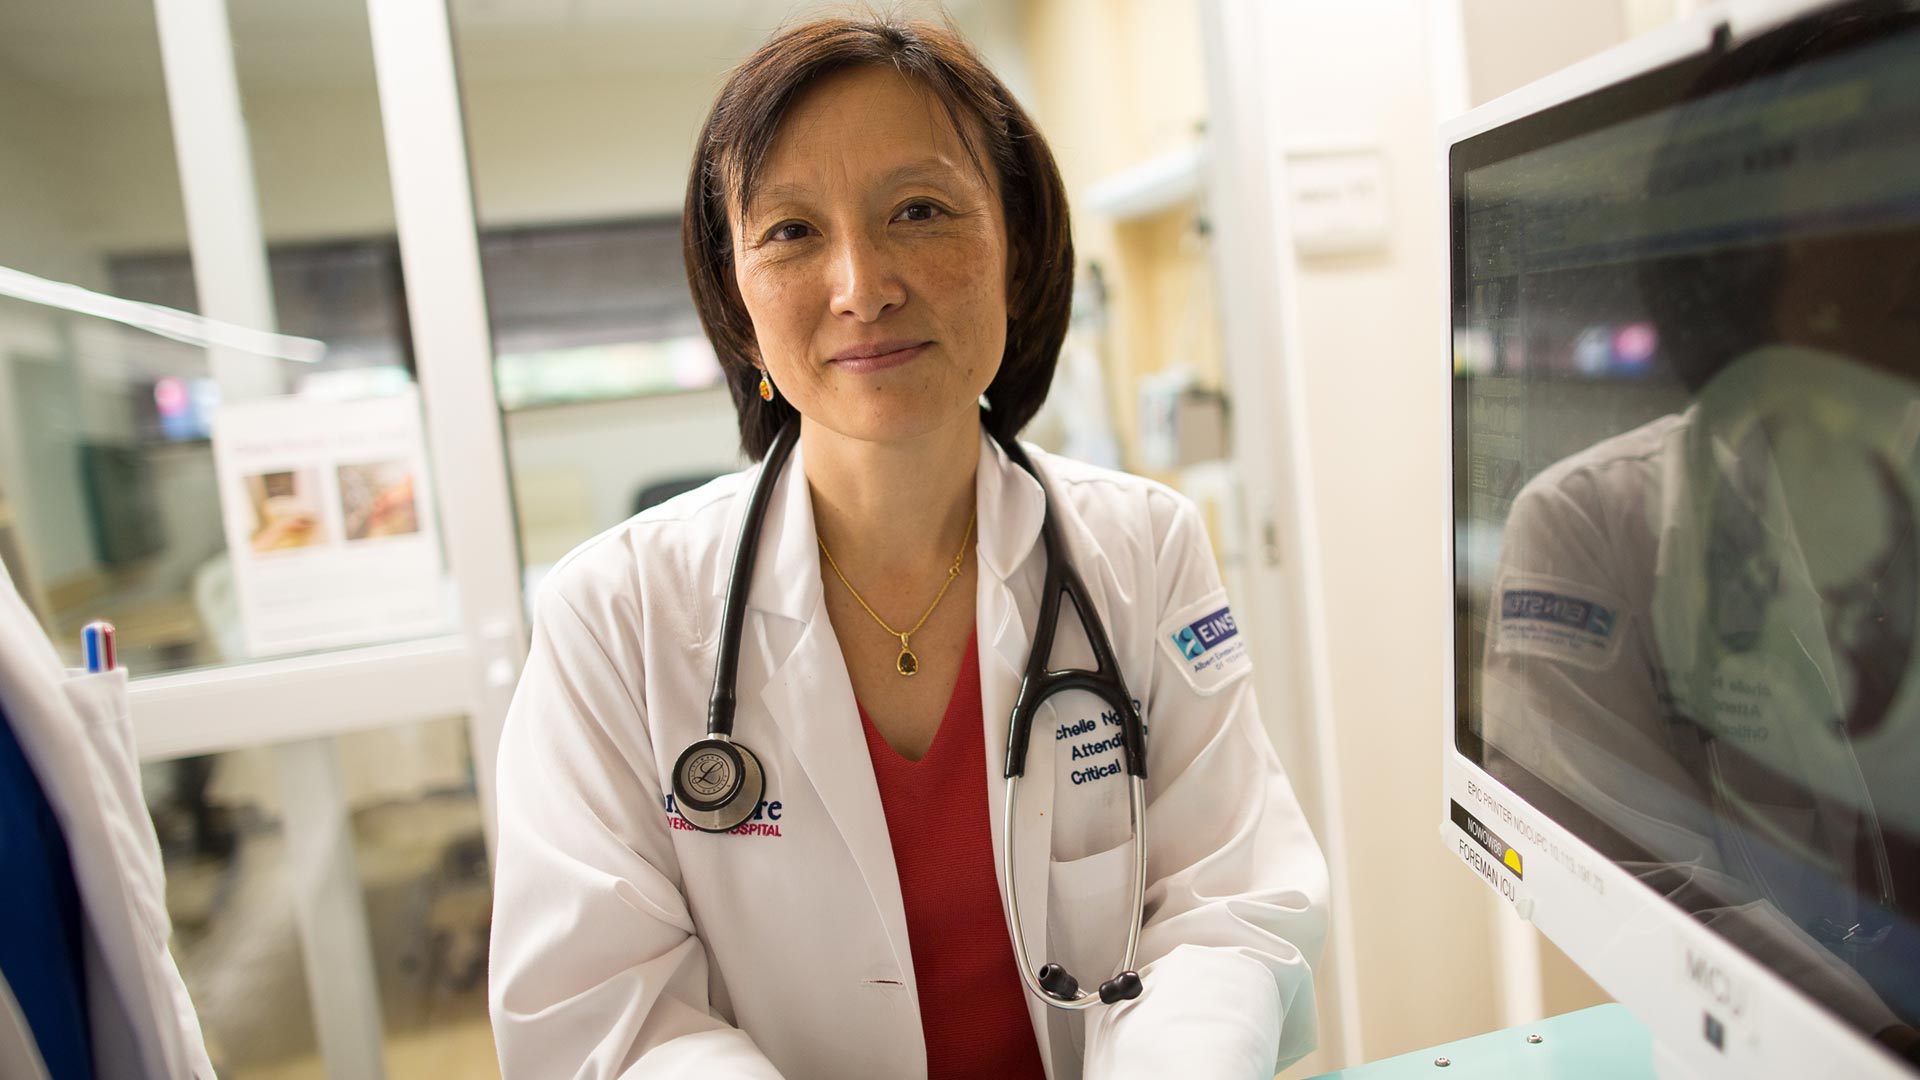 Michelle Ng Gong, M.D., M.S., Named Chief of Division of Pulmonary Medicine